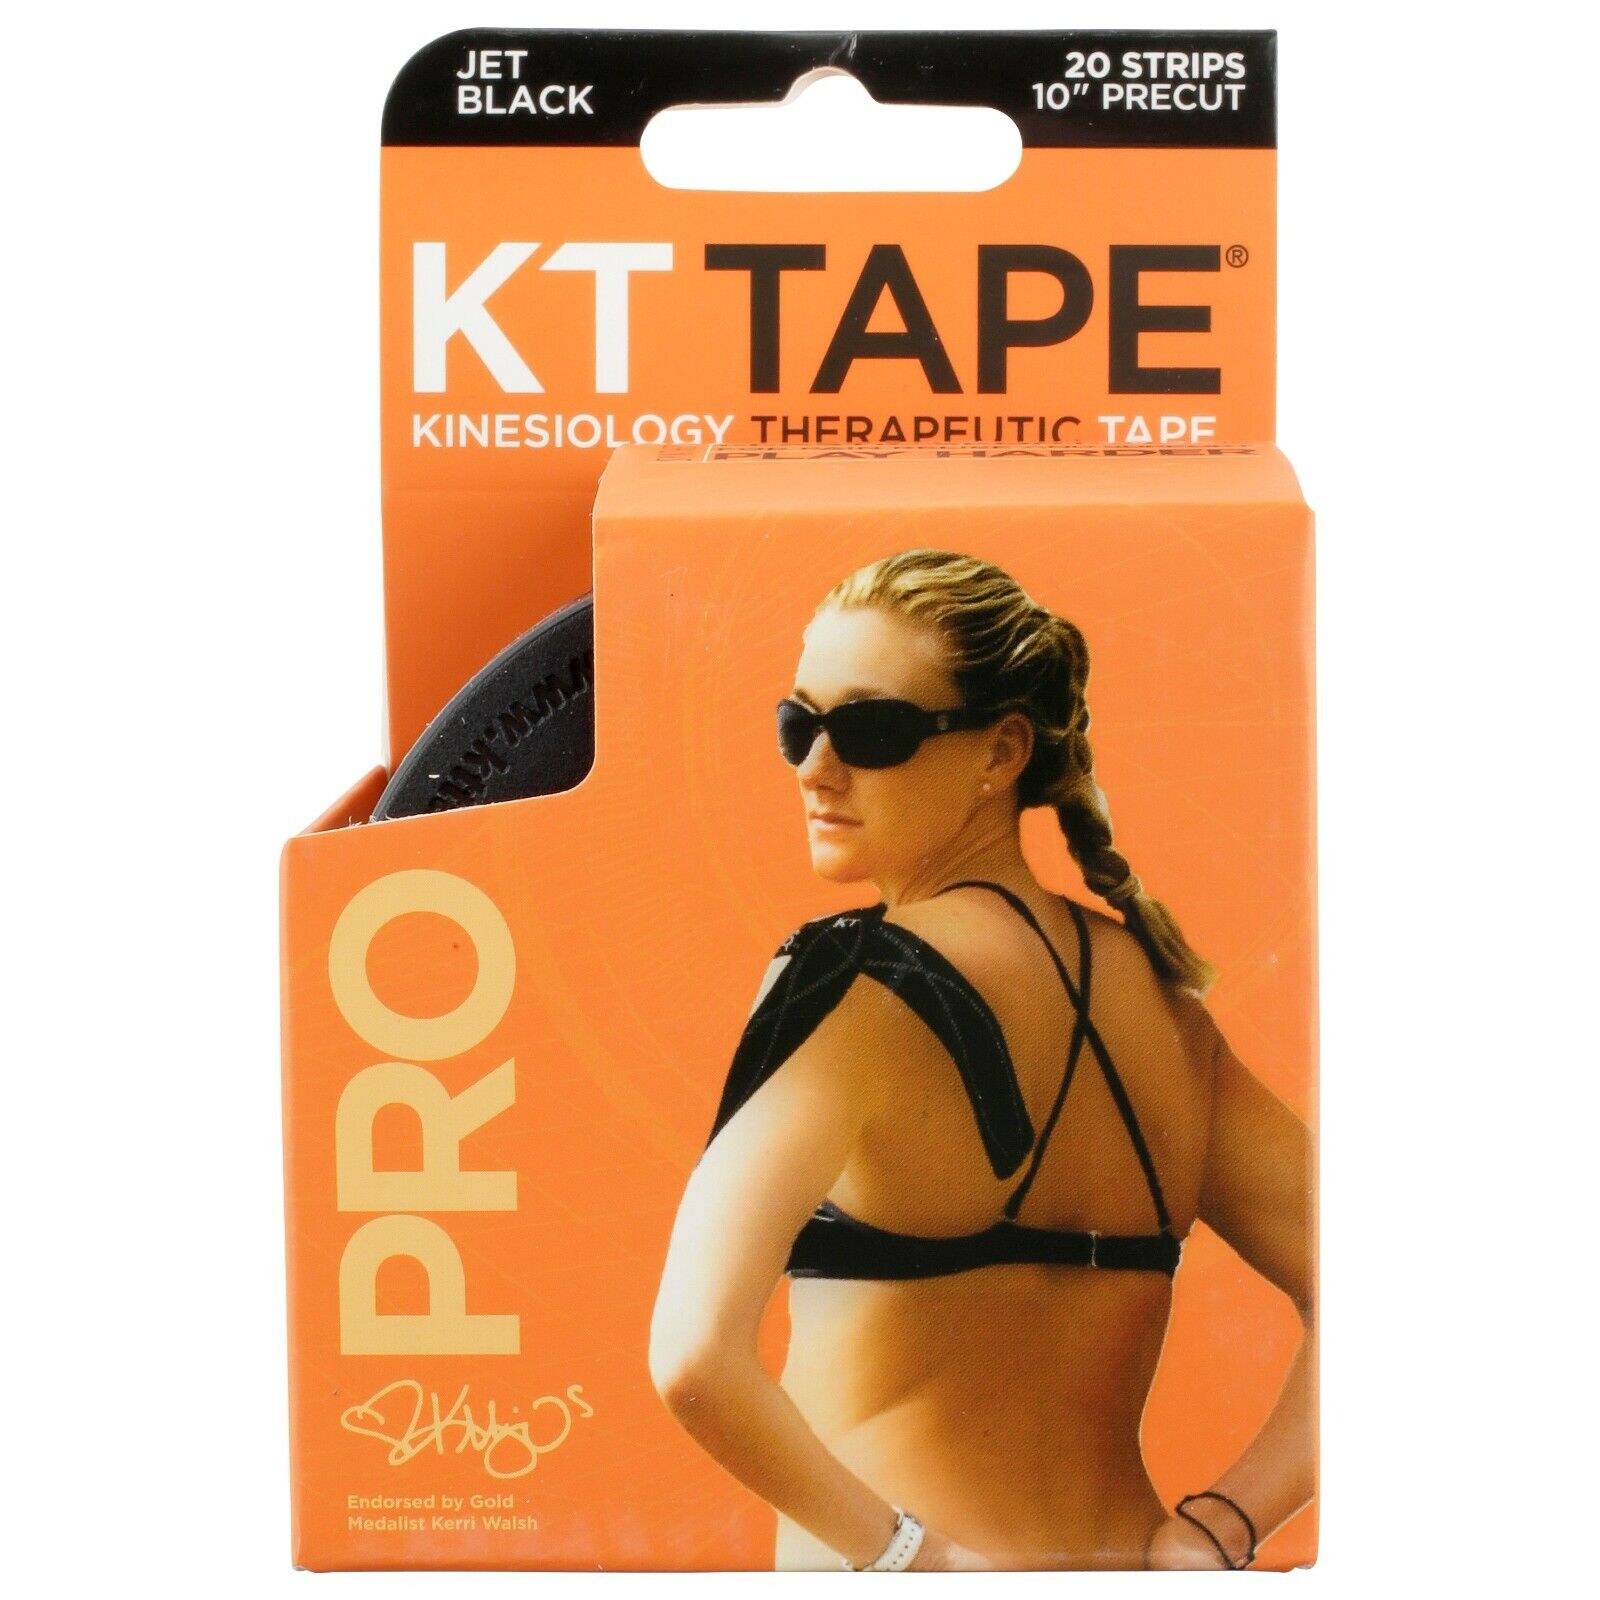 KT Tape Pro Synthetic Elastic 20 Pre Cut Strips Therapeutic Tape